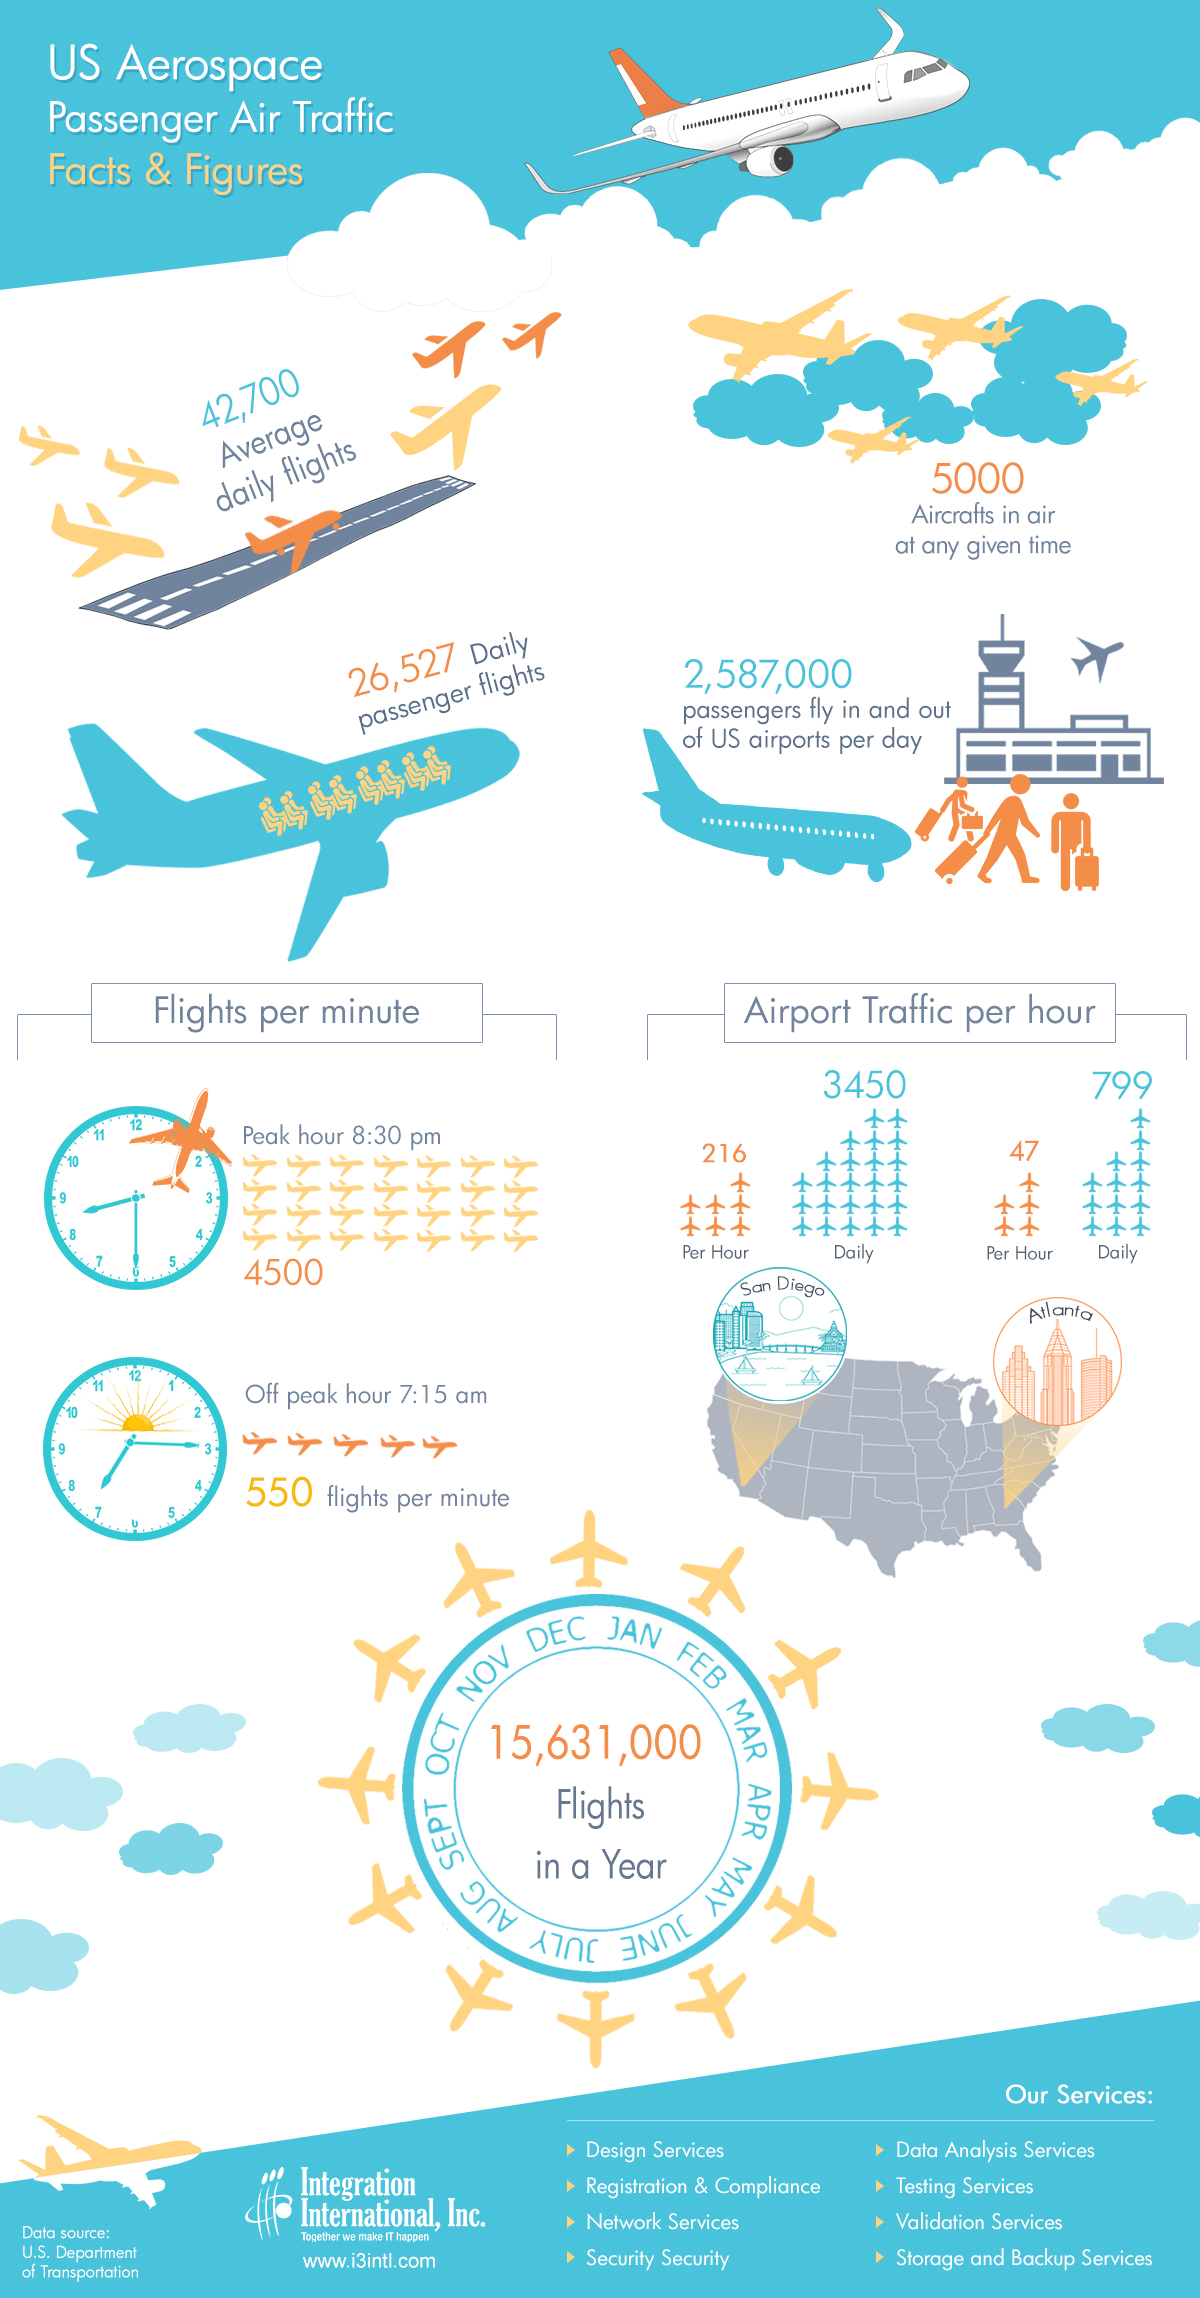 US aerospace passenger air traffic facts and figures